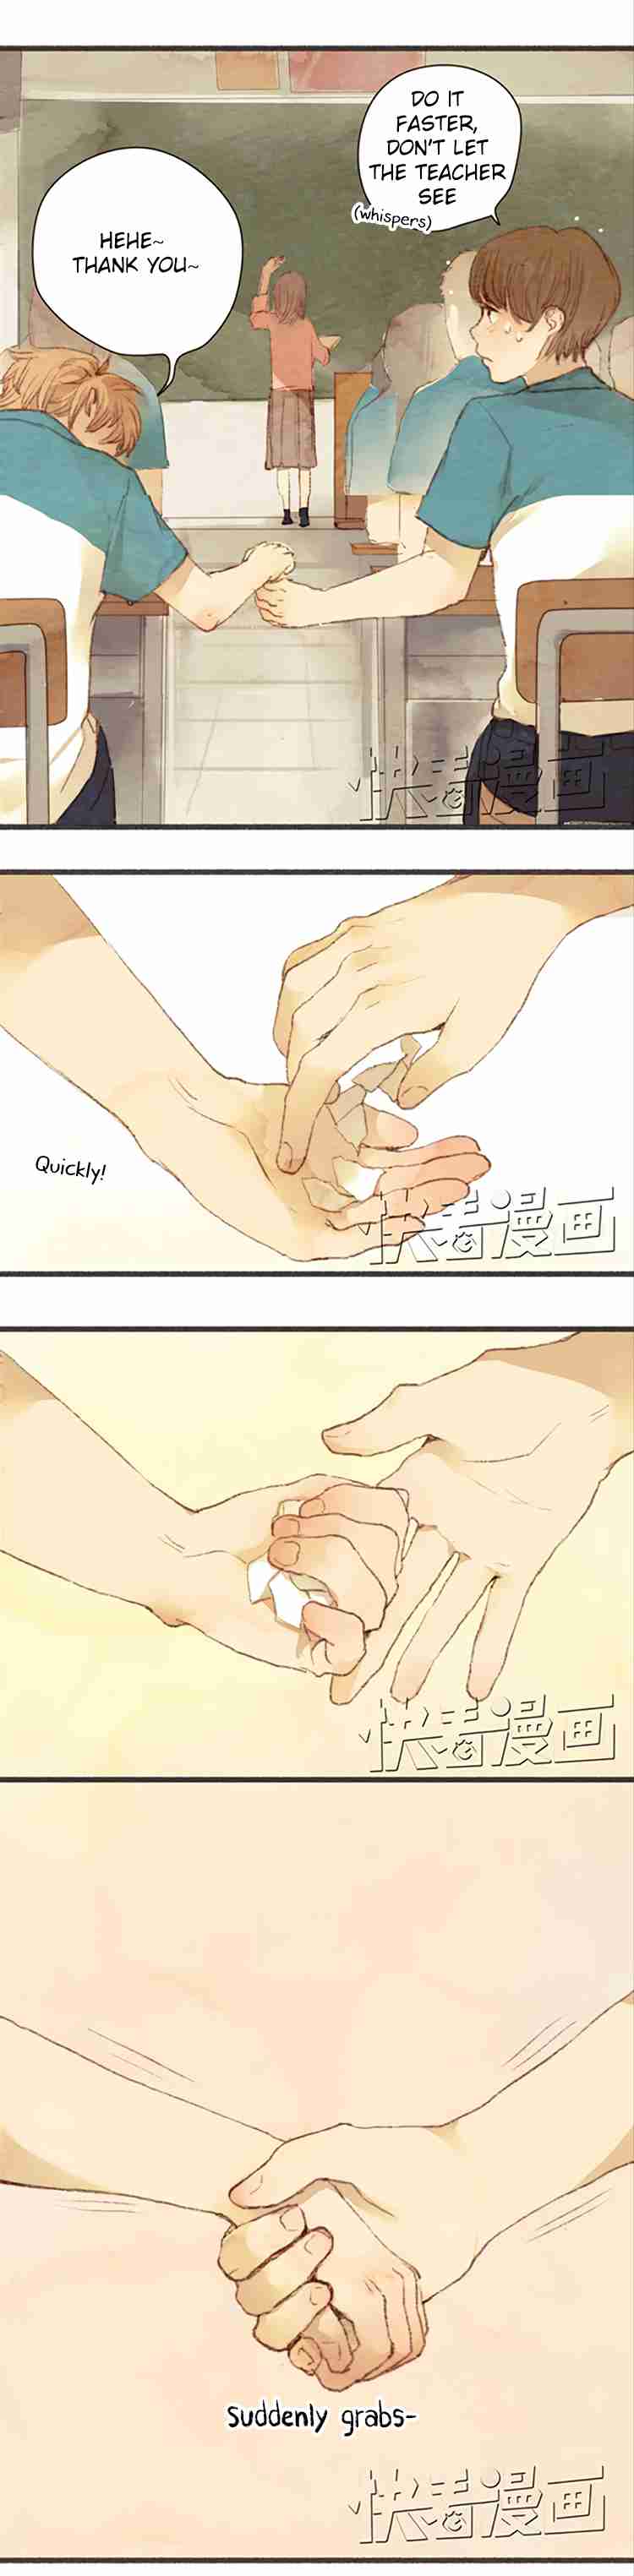 Ten Years Love You Ch. 5 Tightly Holding Both Hands.